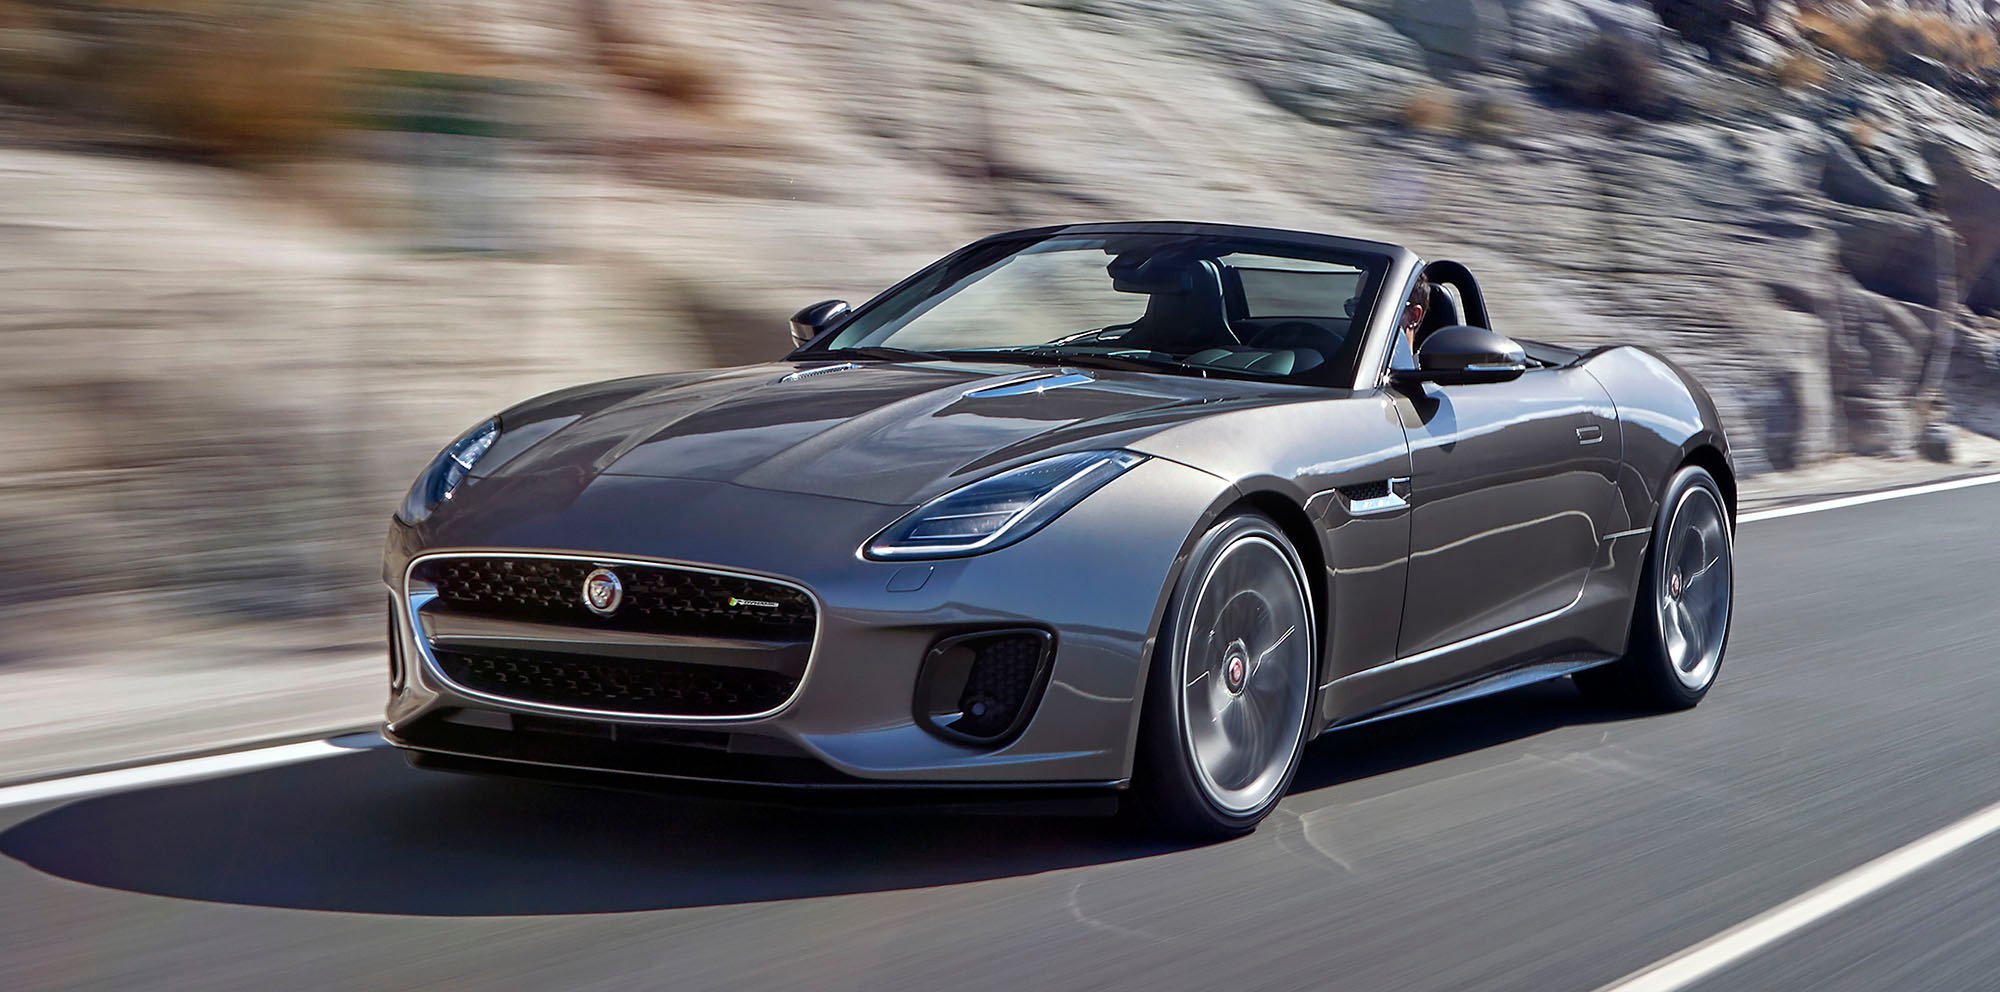 2017 Jaguar F-Type facelift unveiled with new 400 Sport, R-Dynamic models - photos | CarAdvice